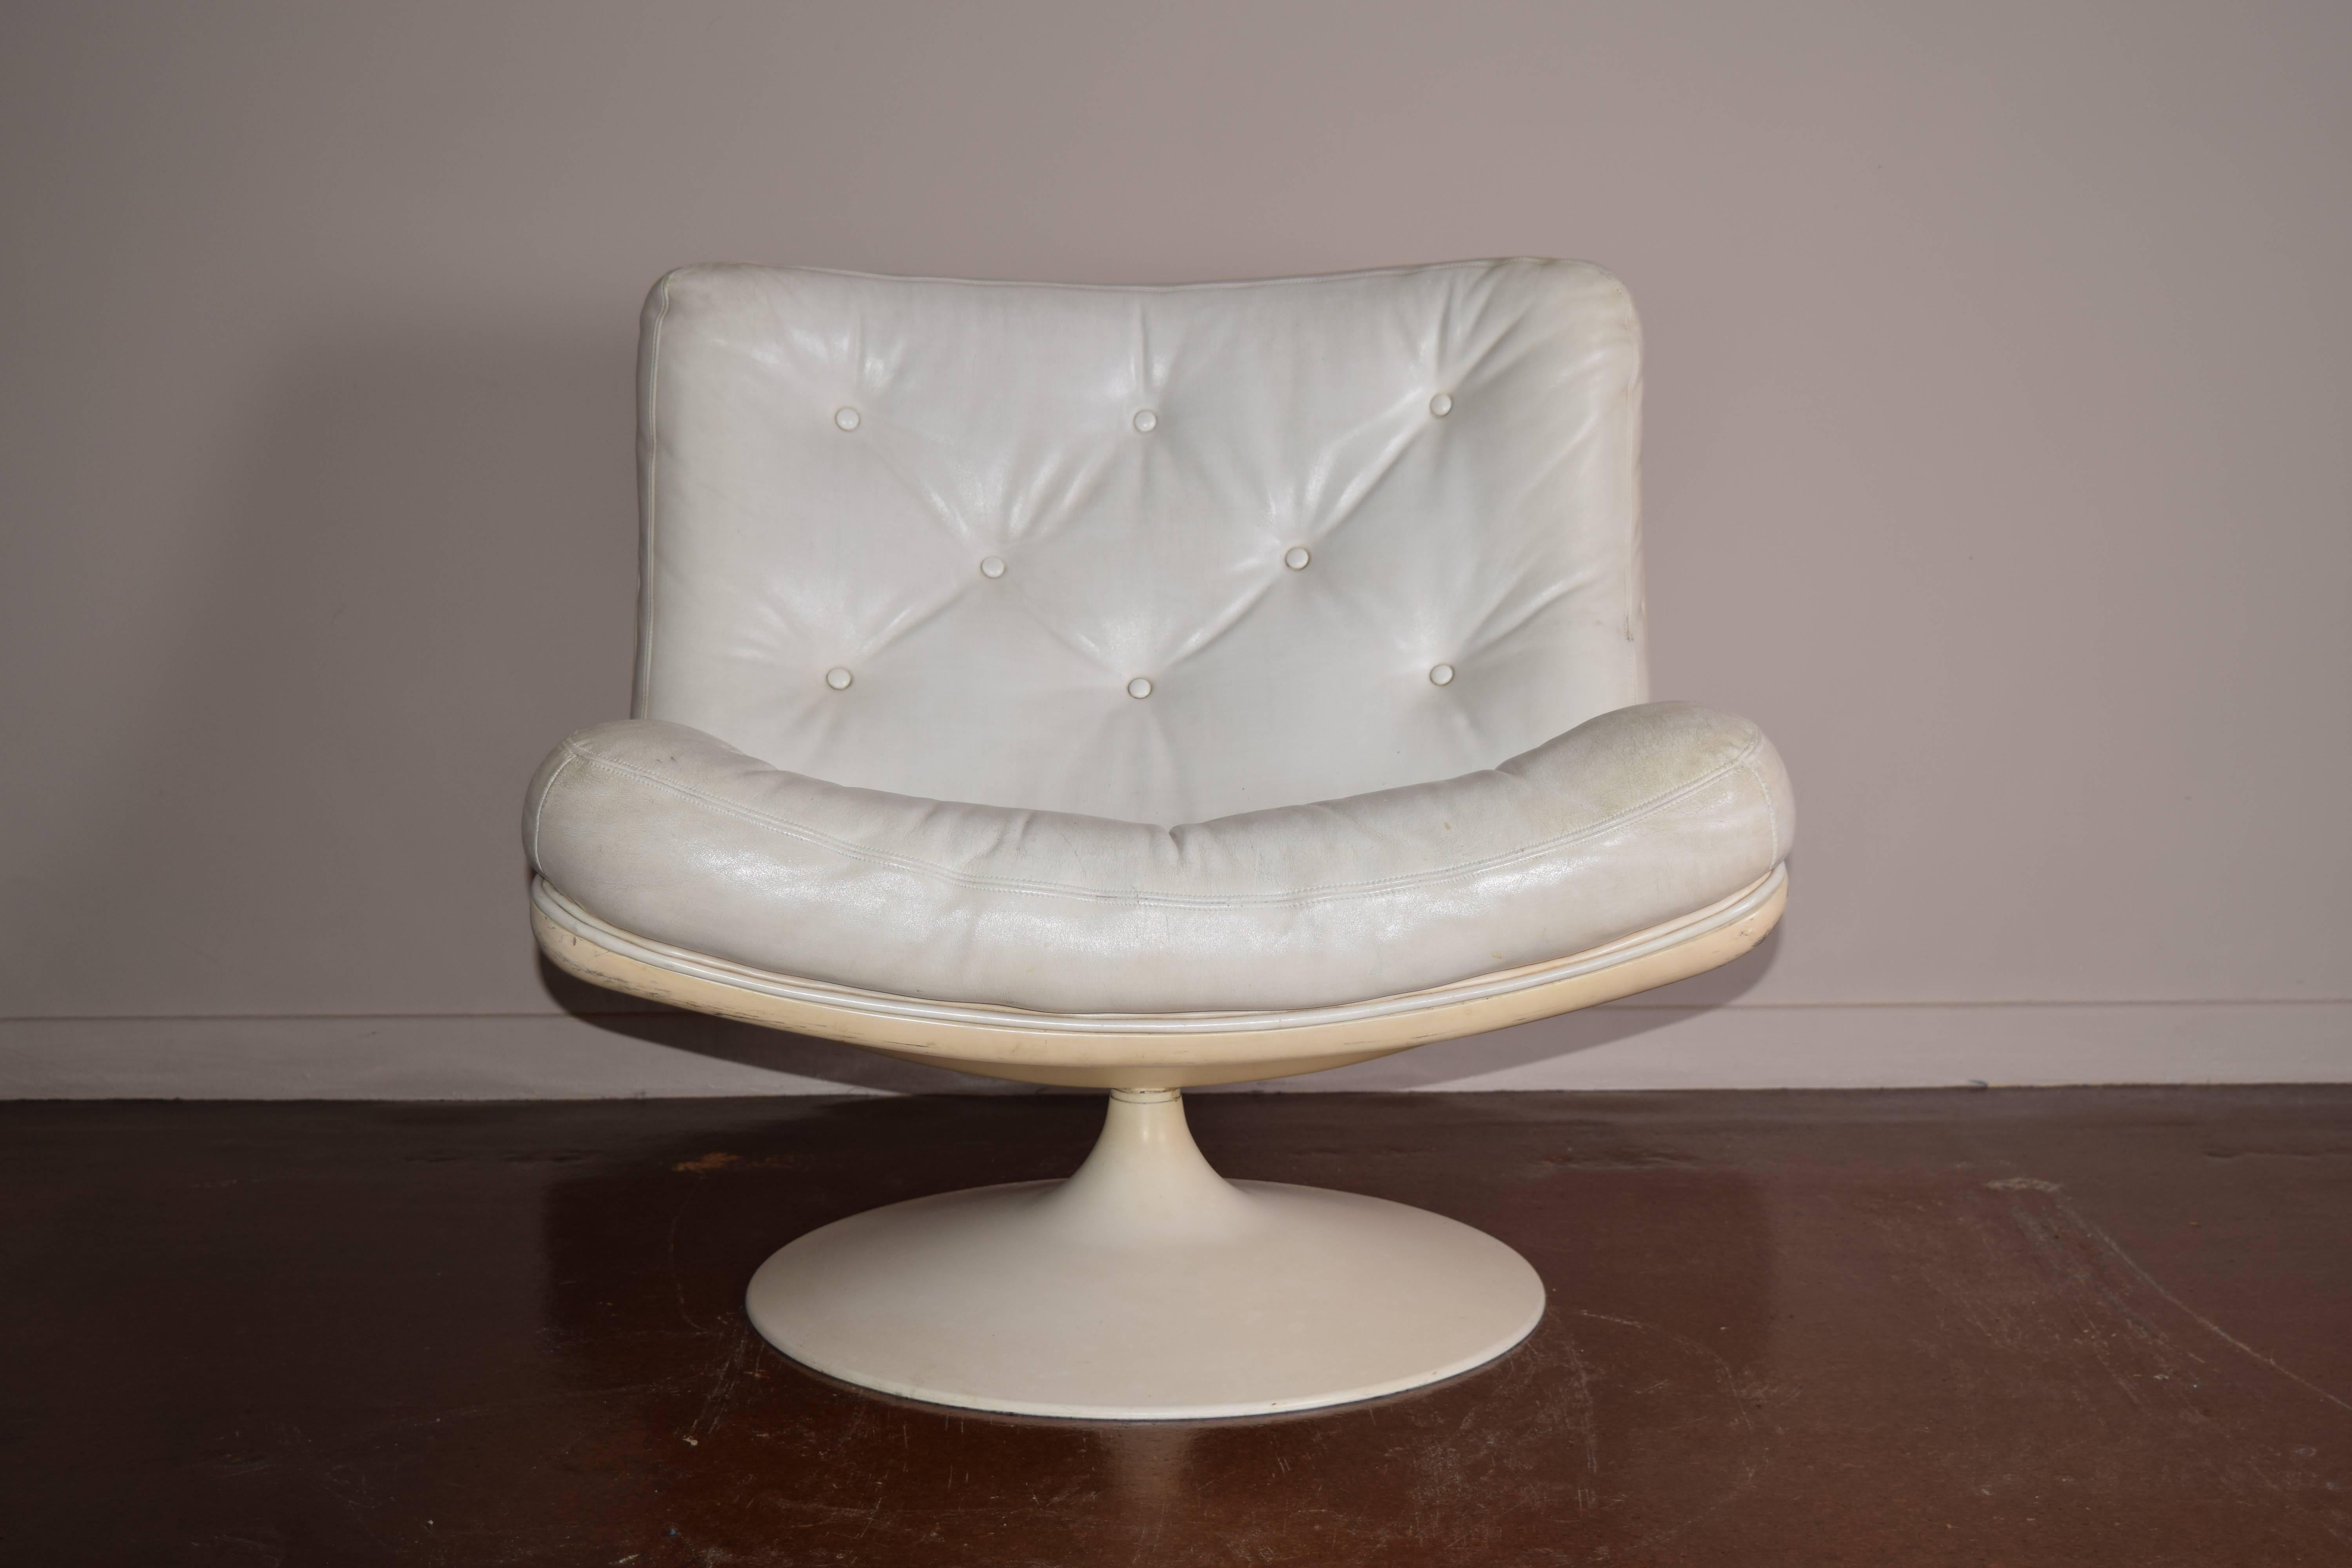 Fabulous pair of 1970s era lounge chairs designed by Geoffrey Harcourt for Artifort. Original white leather upholstery. Model F976 first introduced in 1968.
Free delivery to NYC.